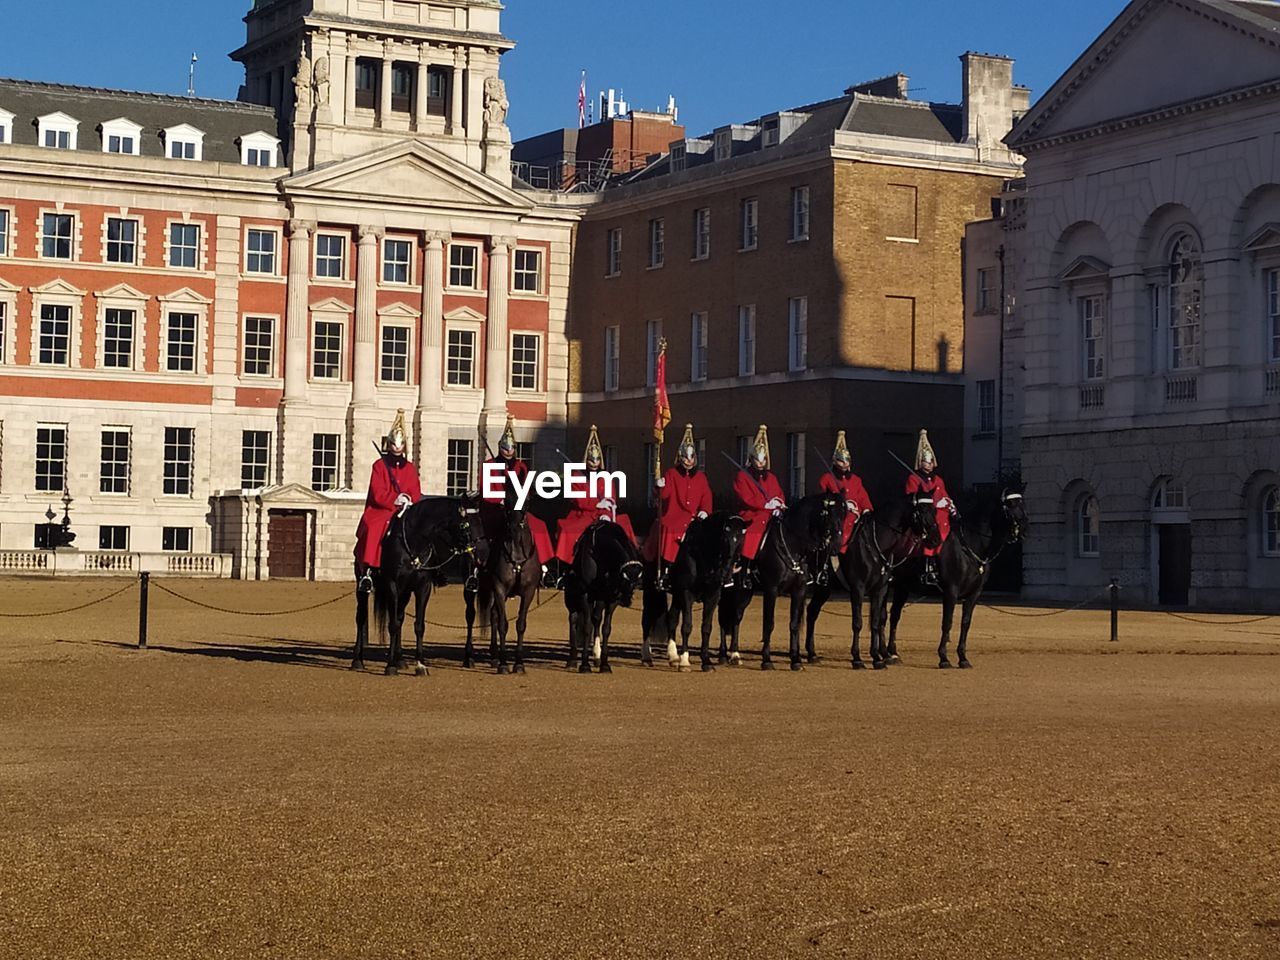 The queen's guards